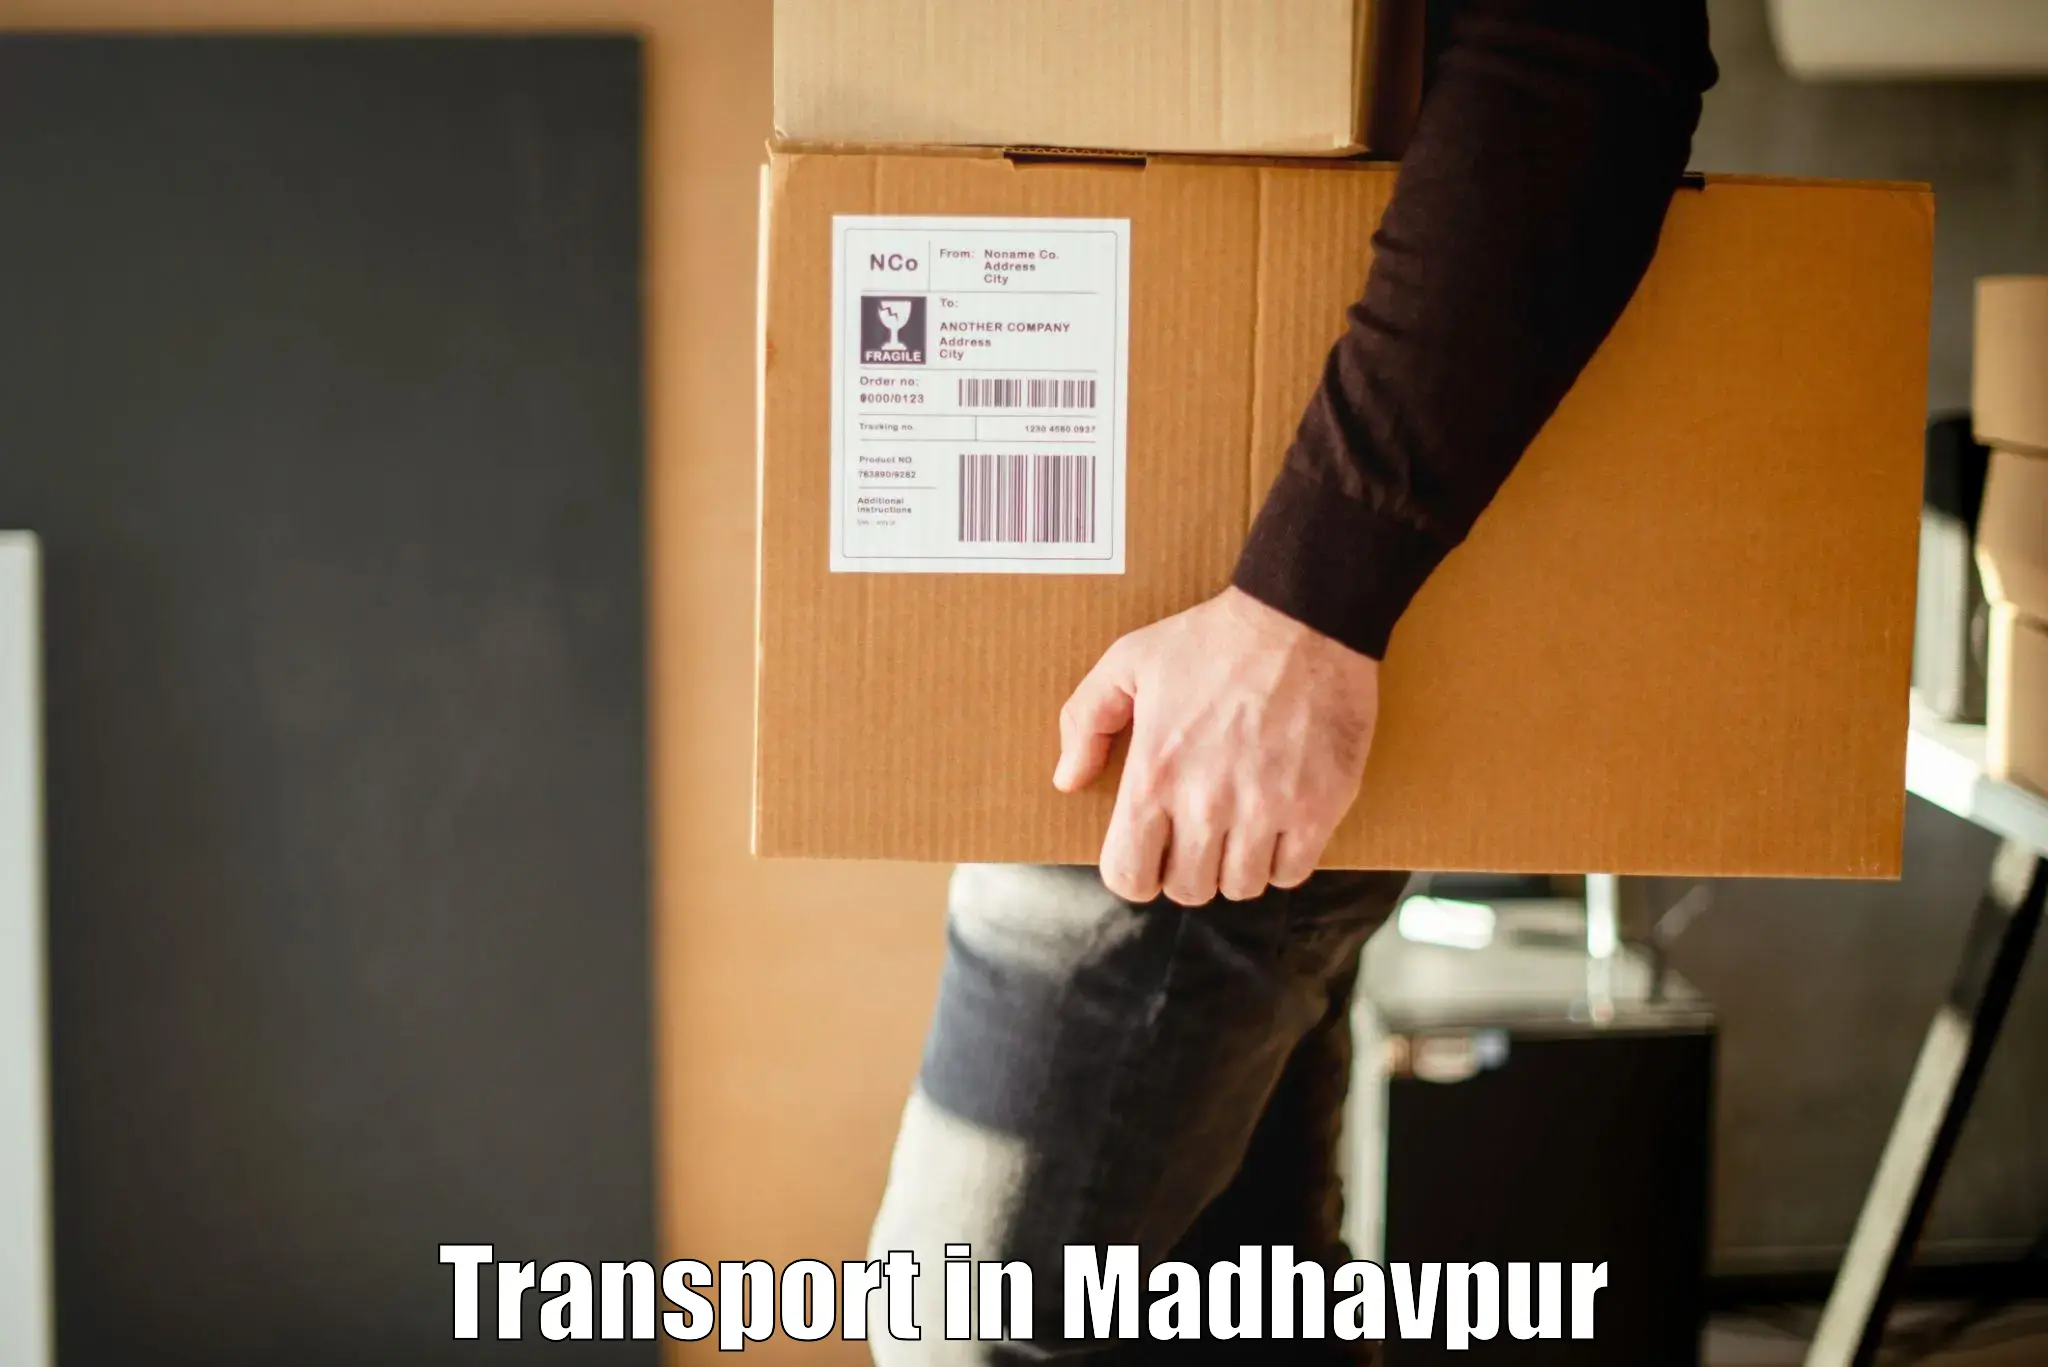 Two wheeler parcel service in Madhavpur